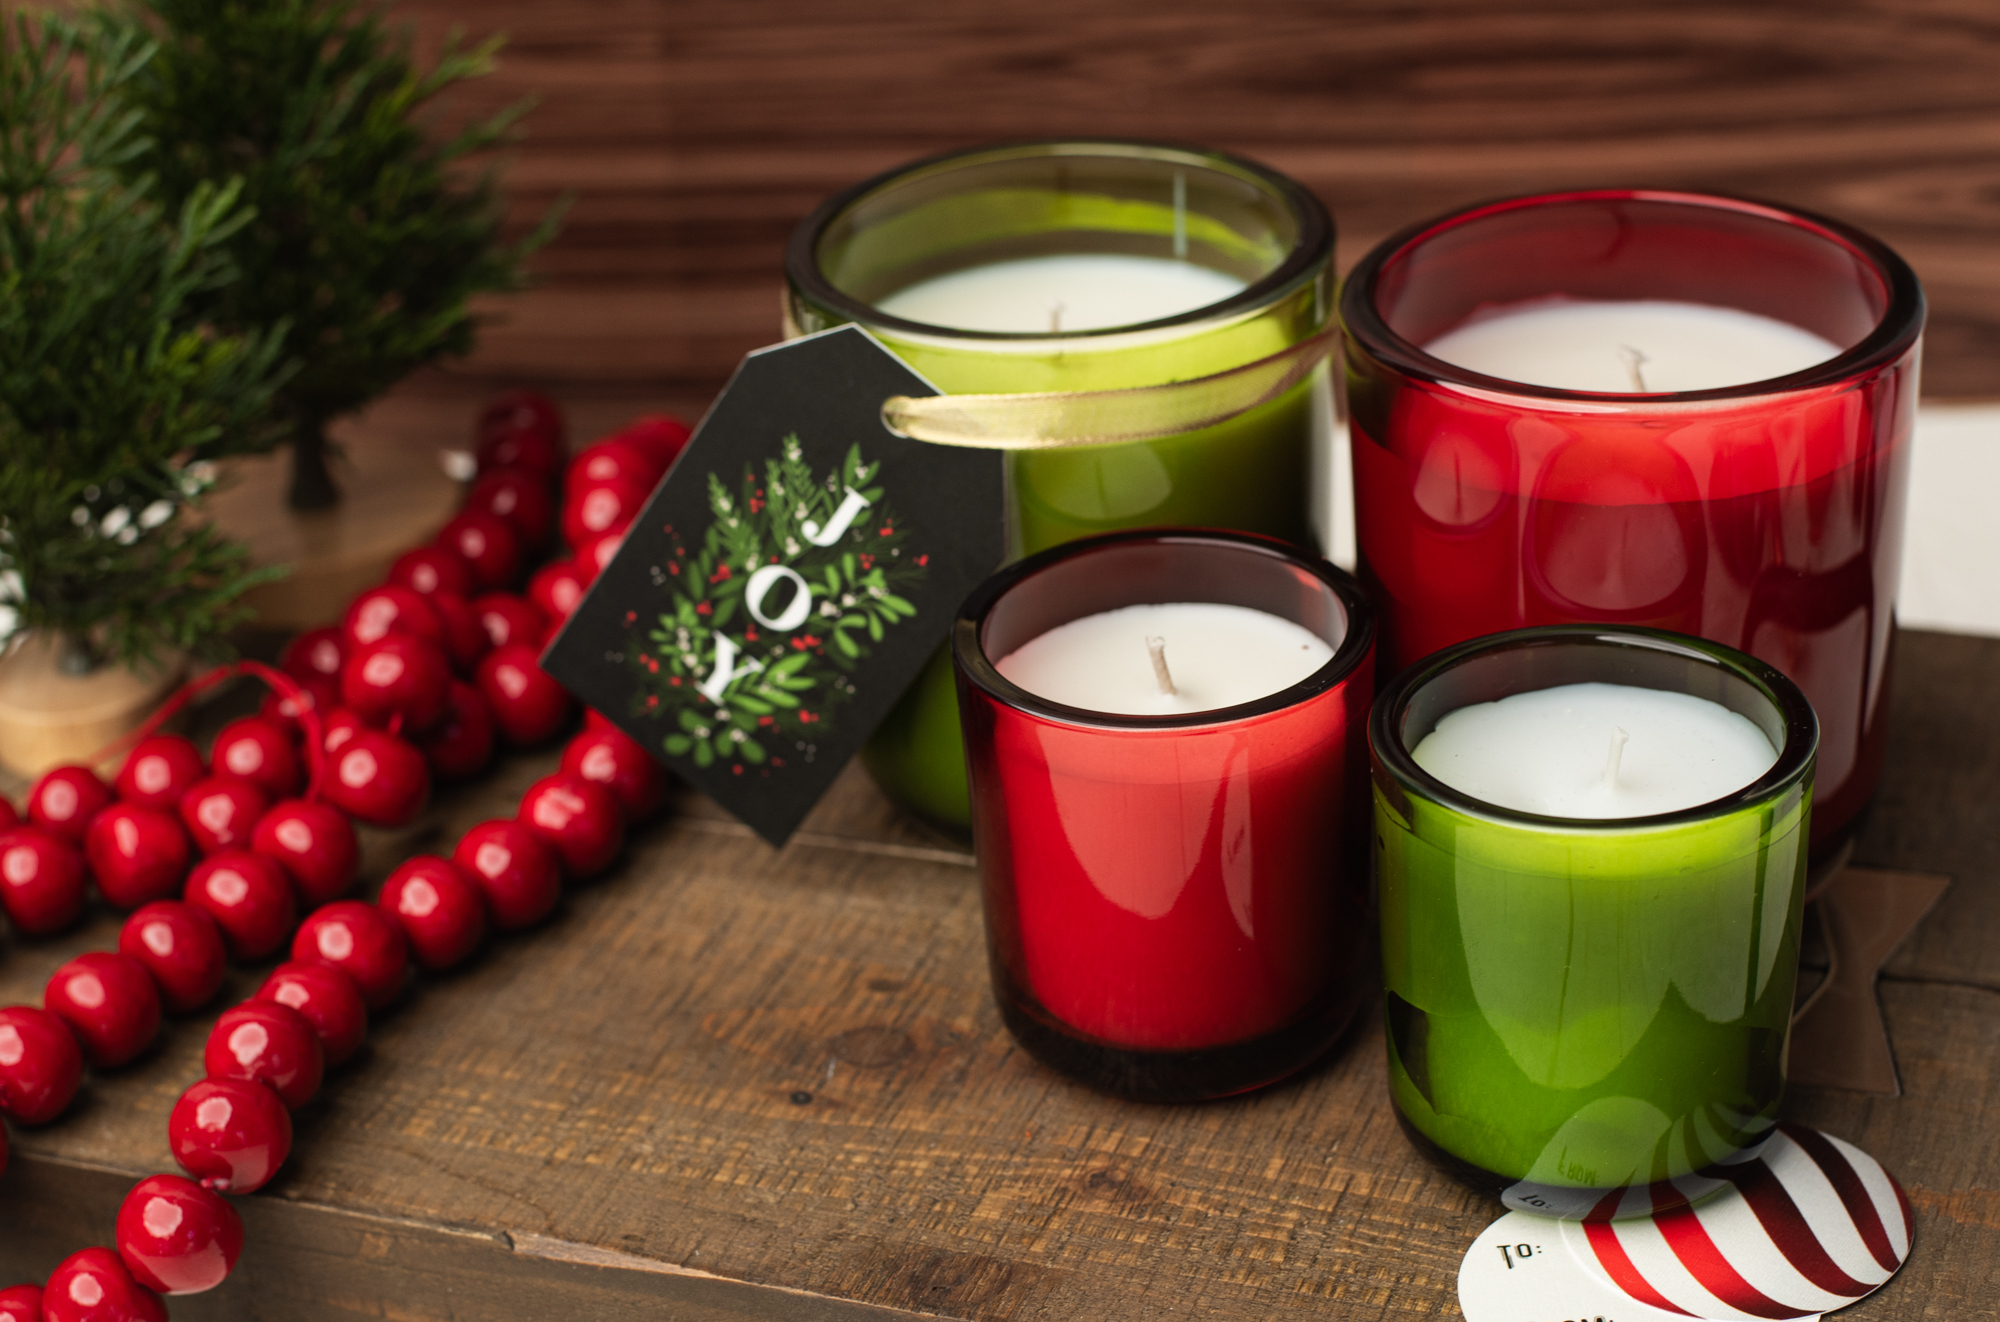 An assortment of candles in red and green containers. A tag that say "joy" in red and green hangs from one of the candles.